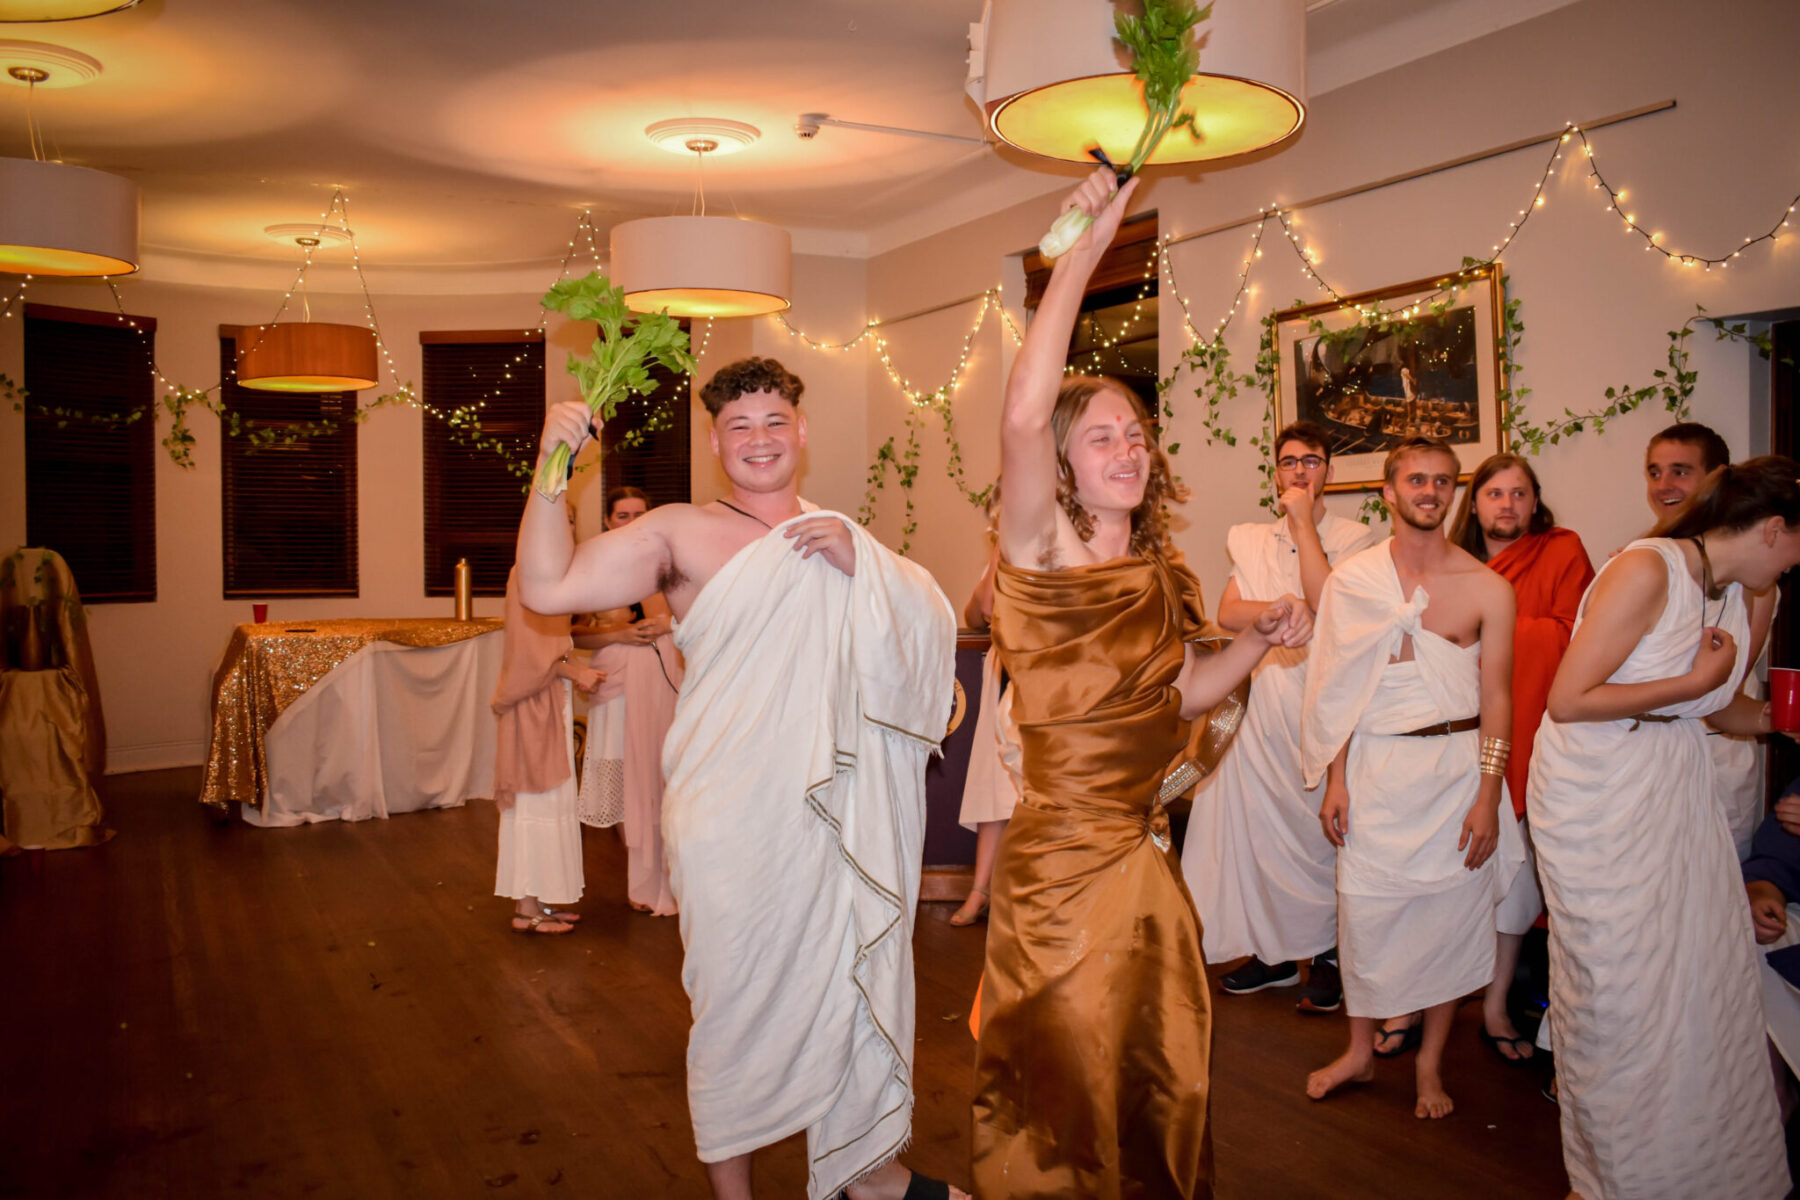 Classics-Week-Toga-Party-2021-Edited-21-scaled-1. Campion College Australia.